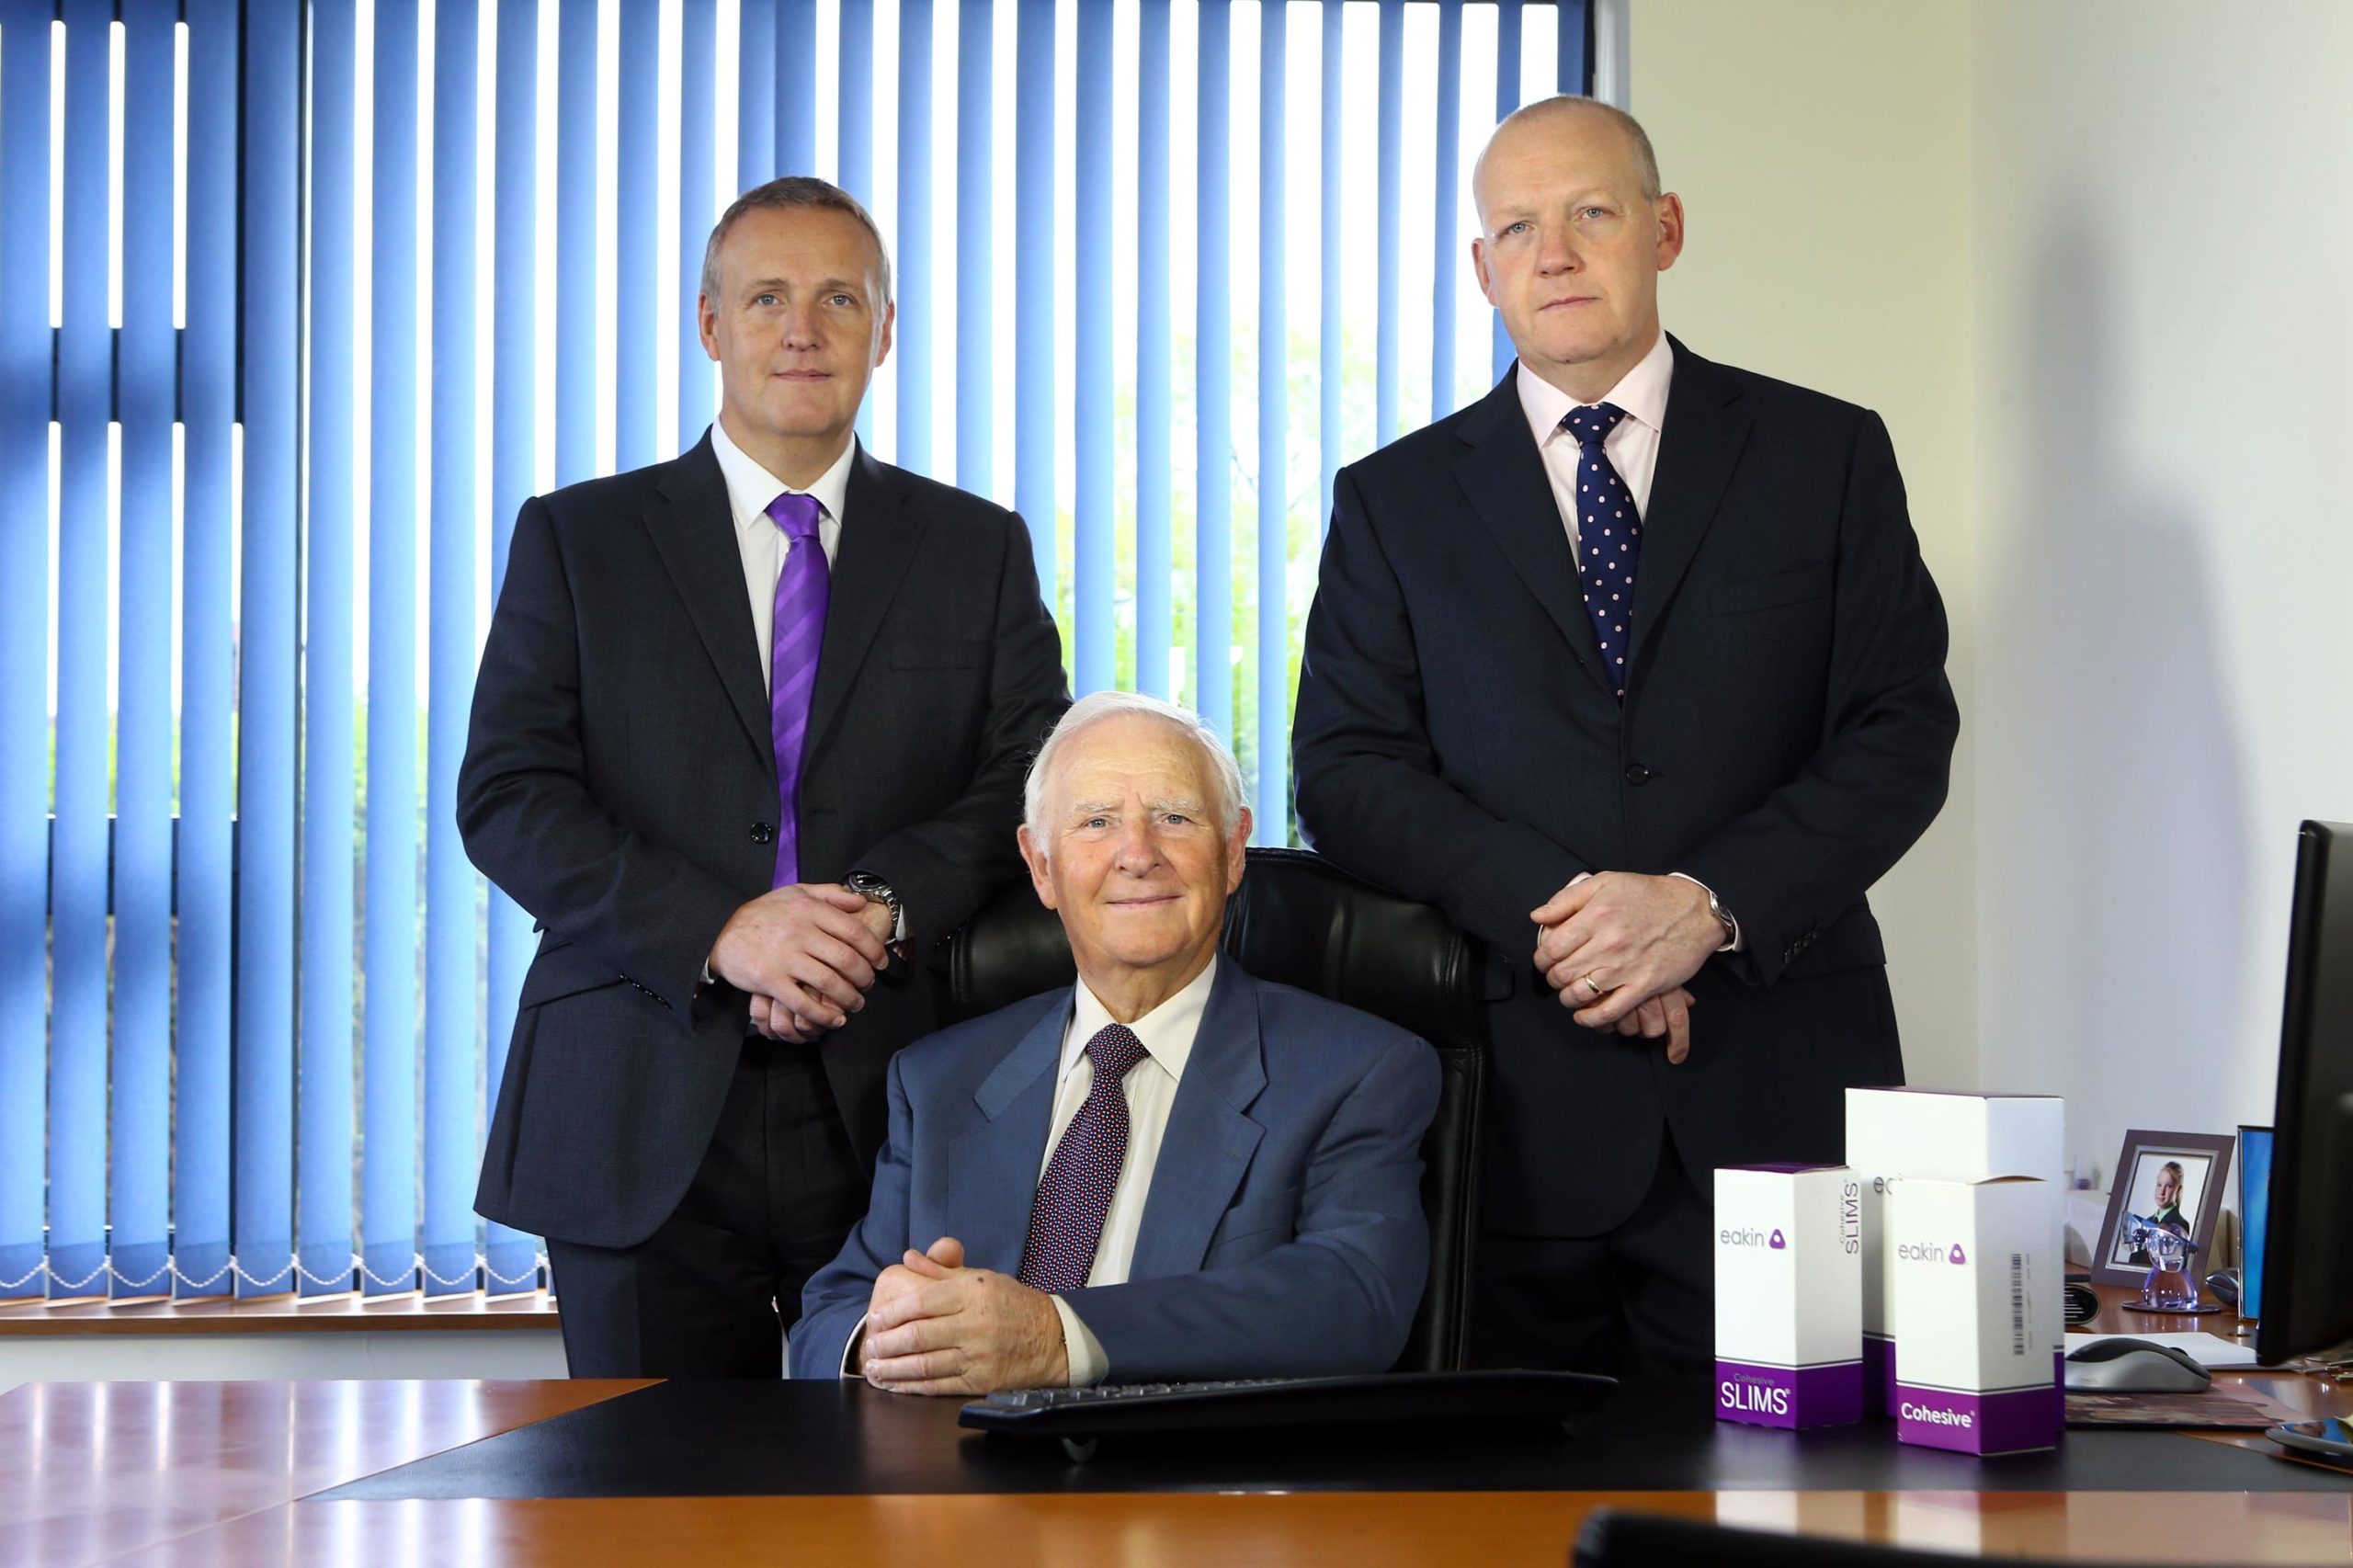 Eakin Group continues investment acquisition programme